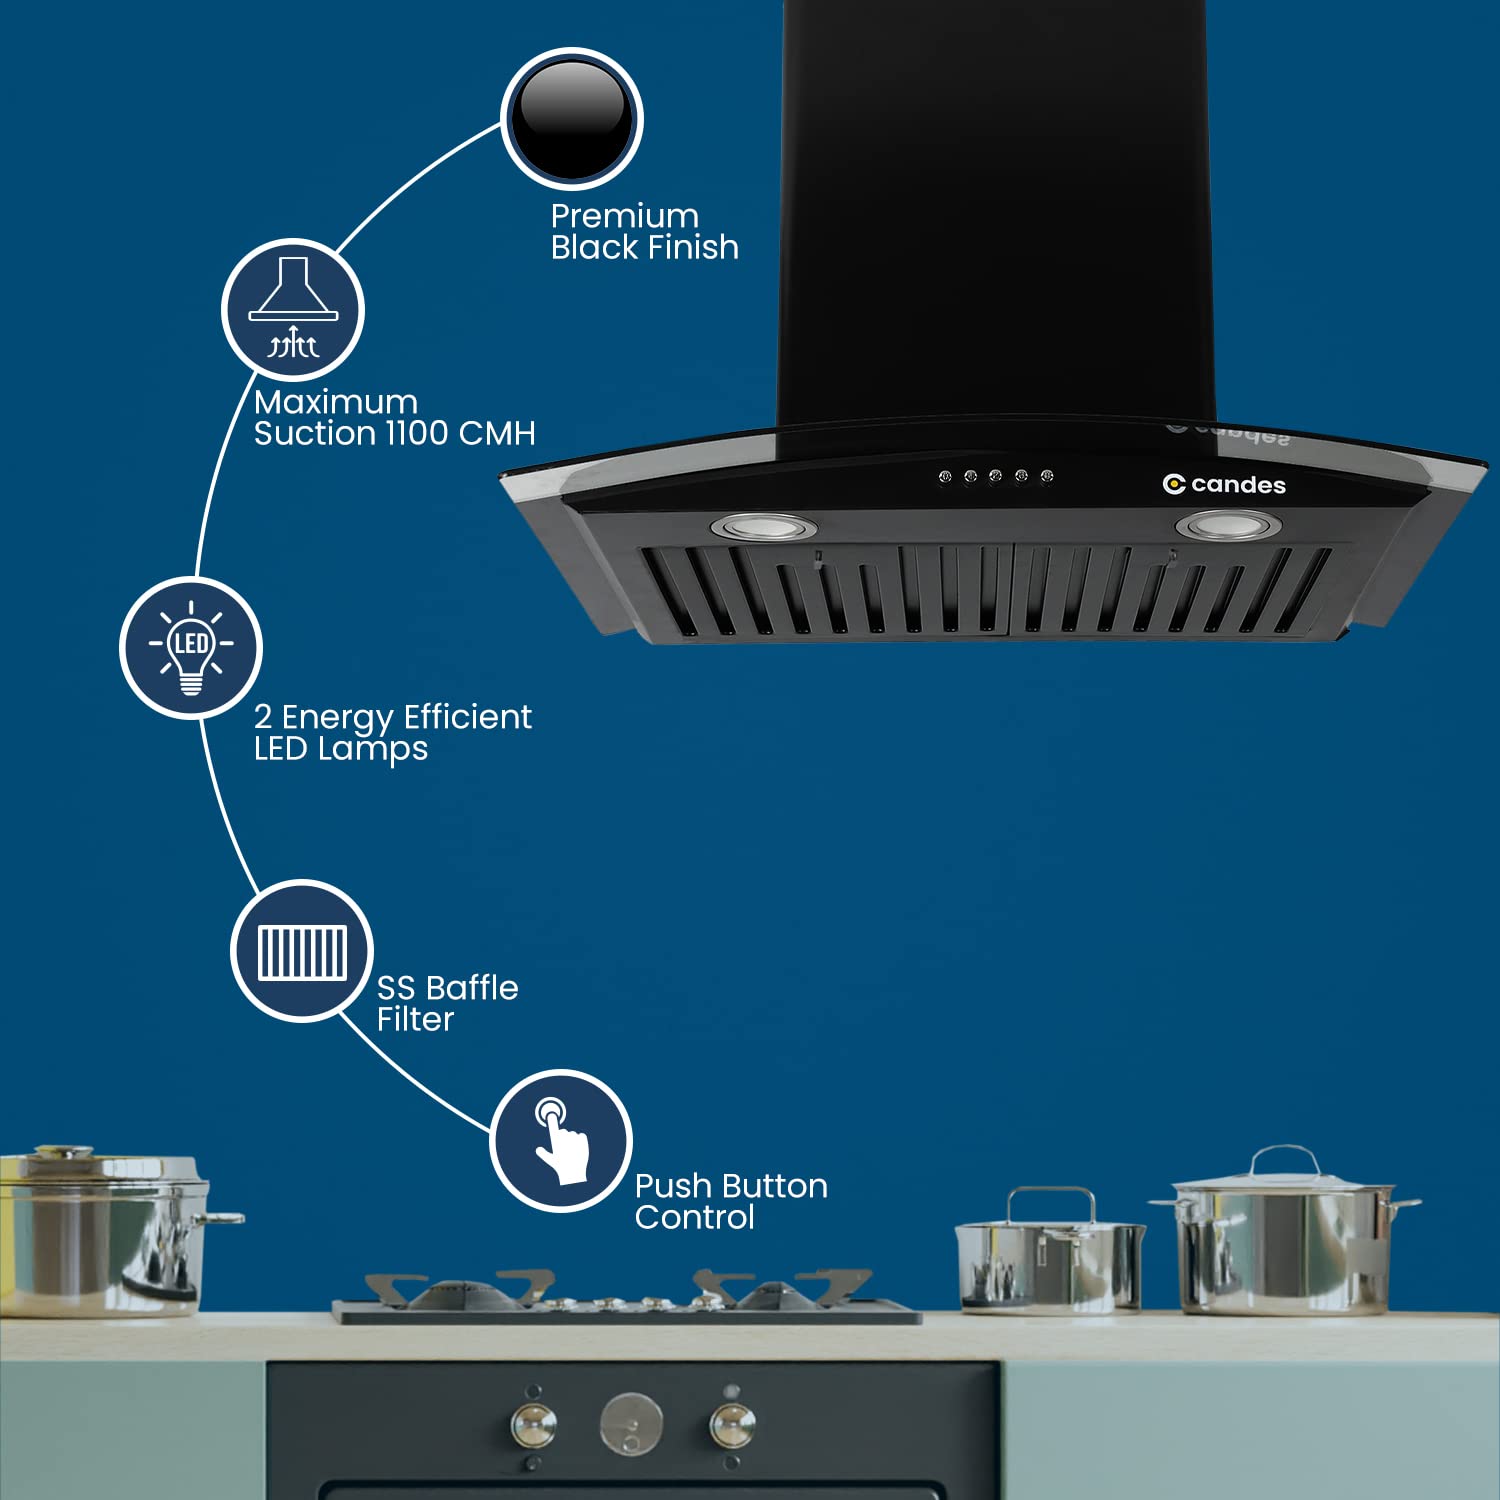 Candes Blaze Kitchen Chimney 60 Cms with Powerful 1100 m3/h Suction| Stainless Steel Baffle Filter | Curved Glass |Oil Collector |Anti-Fingerprint & Black Wall Mount Range Hood |3 Level Push Control | Stainless Steel Baffle Filter | Metal Blower | 2 Level